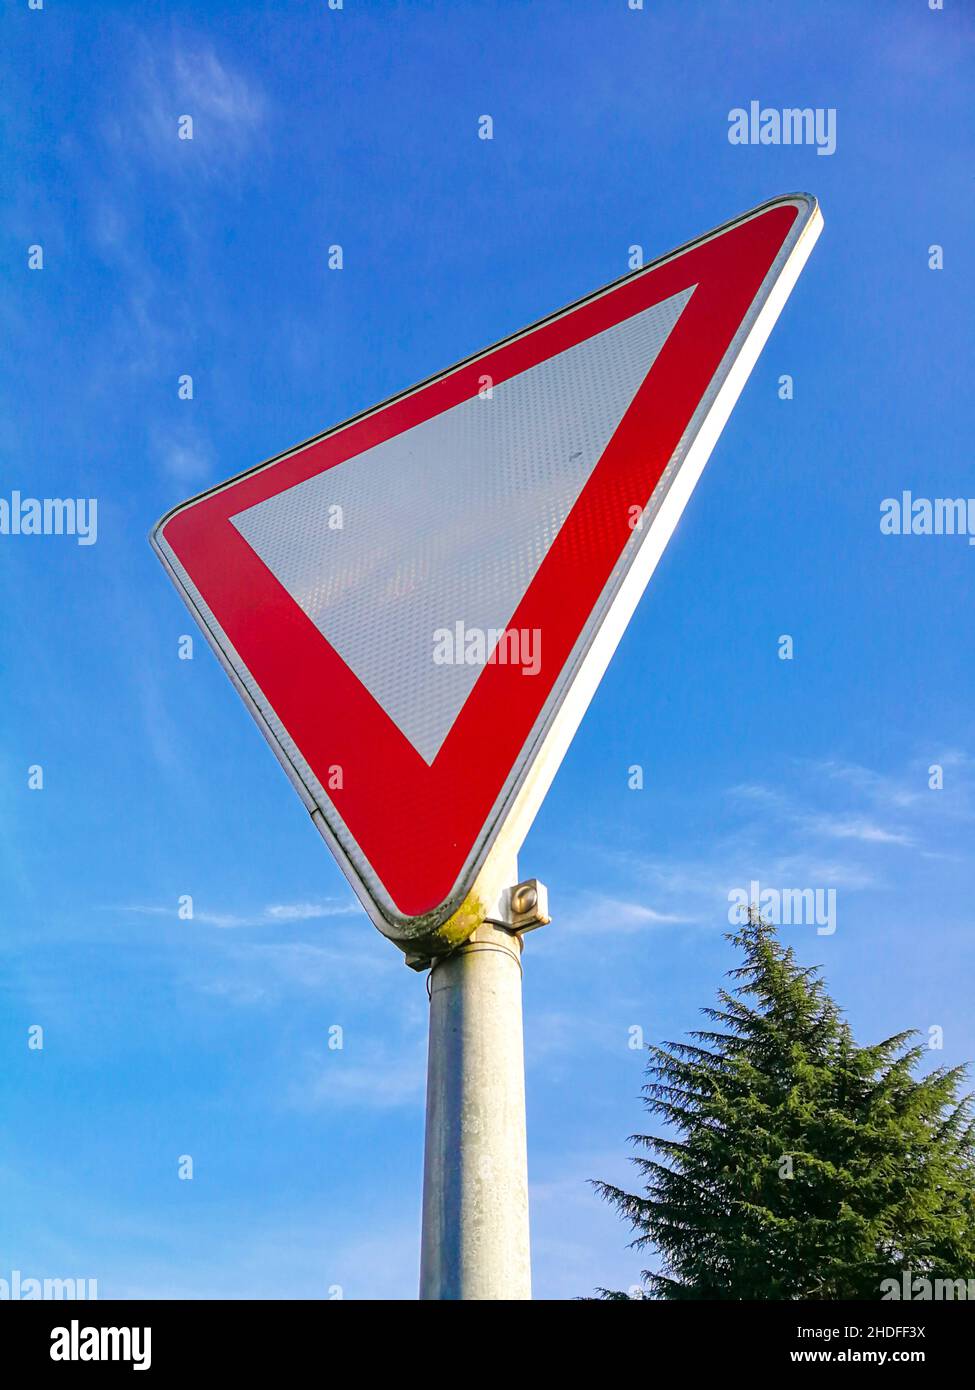 german Give way priority yield road traffic roadsign Over a Blue Sky Stock Photo